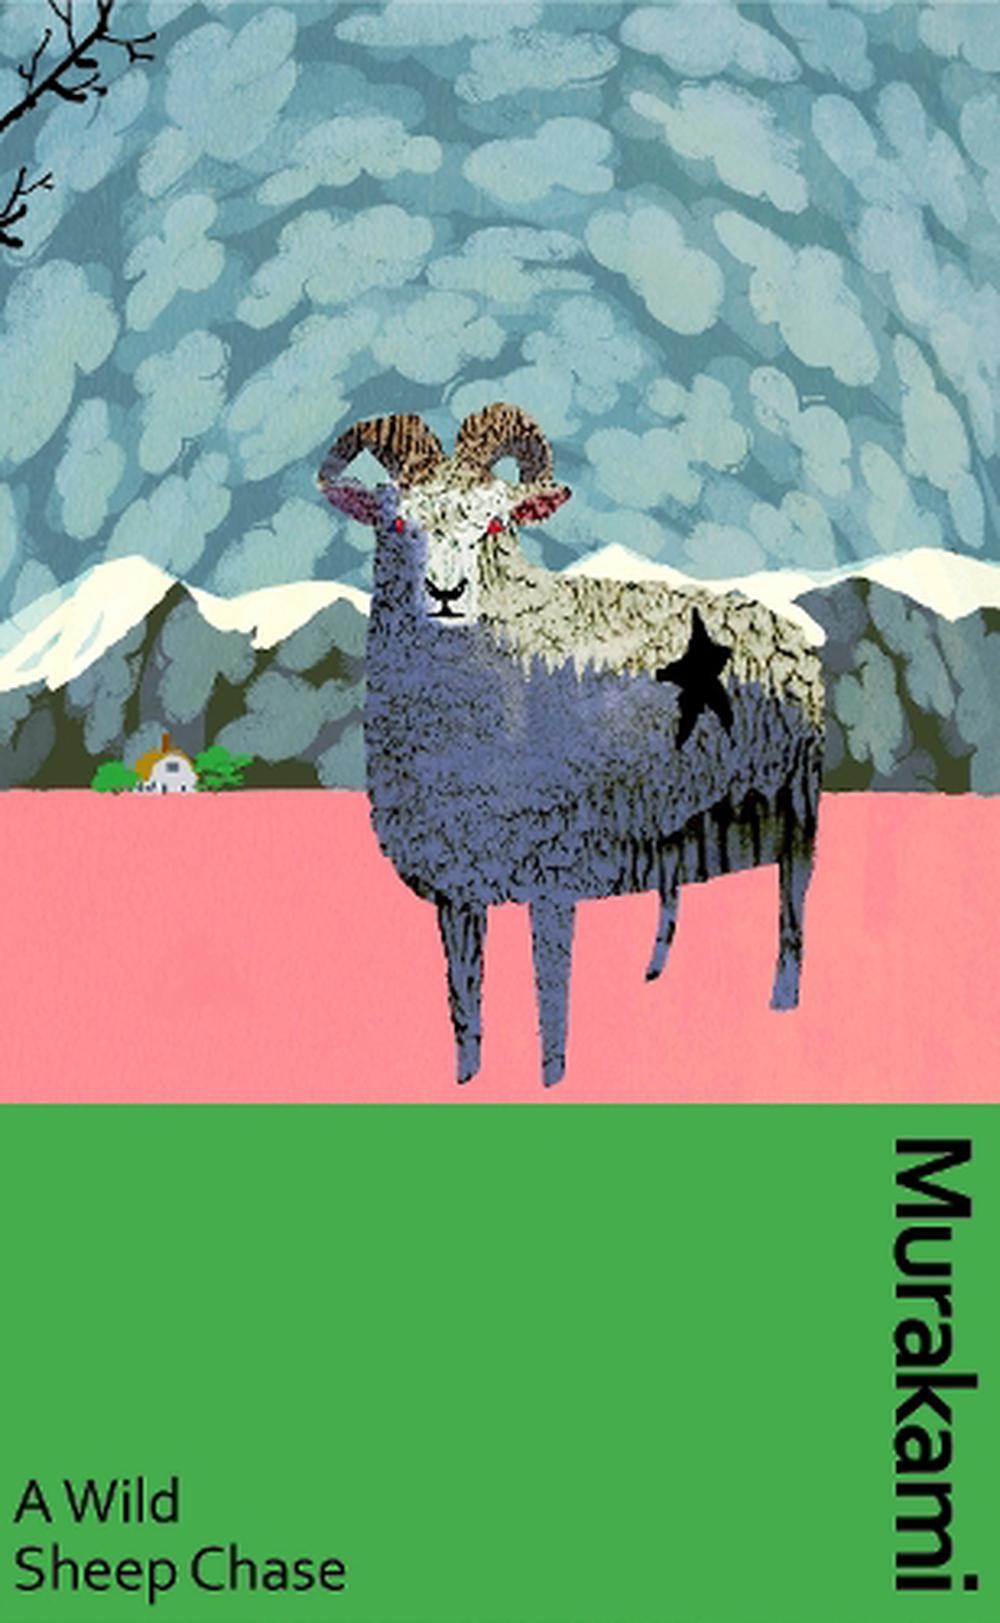 The　online　9781784878771　Hardcover,　Sheep　Murakami,　A　at　by　Haruki　Wild　Nile　Chase　Buy